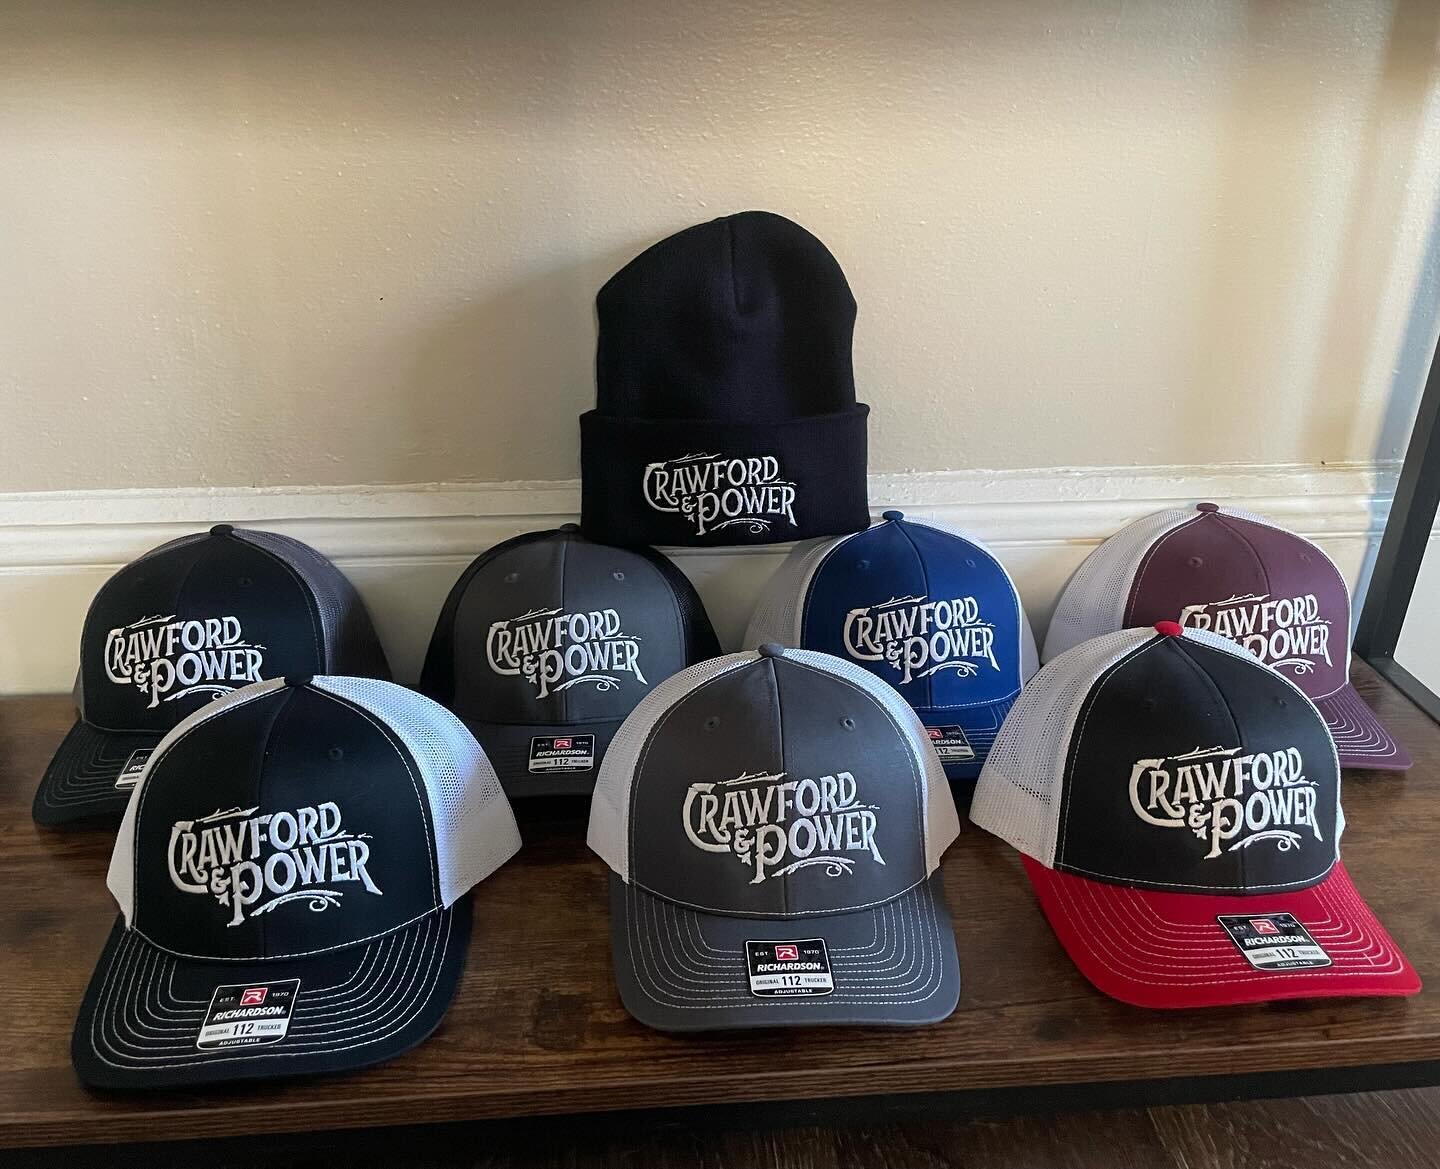 Y&rsquo;all been asking&hellip; and we ain&rsquo;t cappin&hellip; We got hats, go get em. 🧢 #nocap